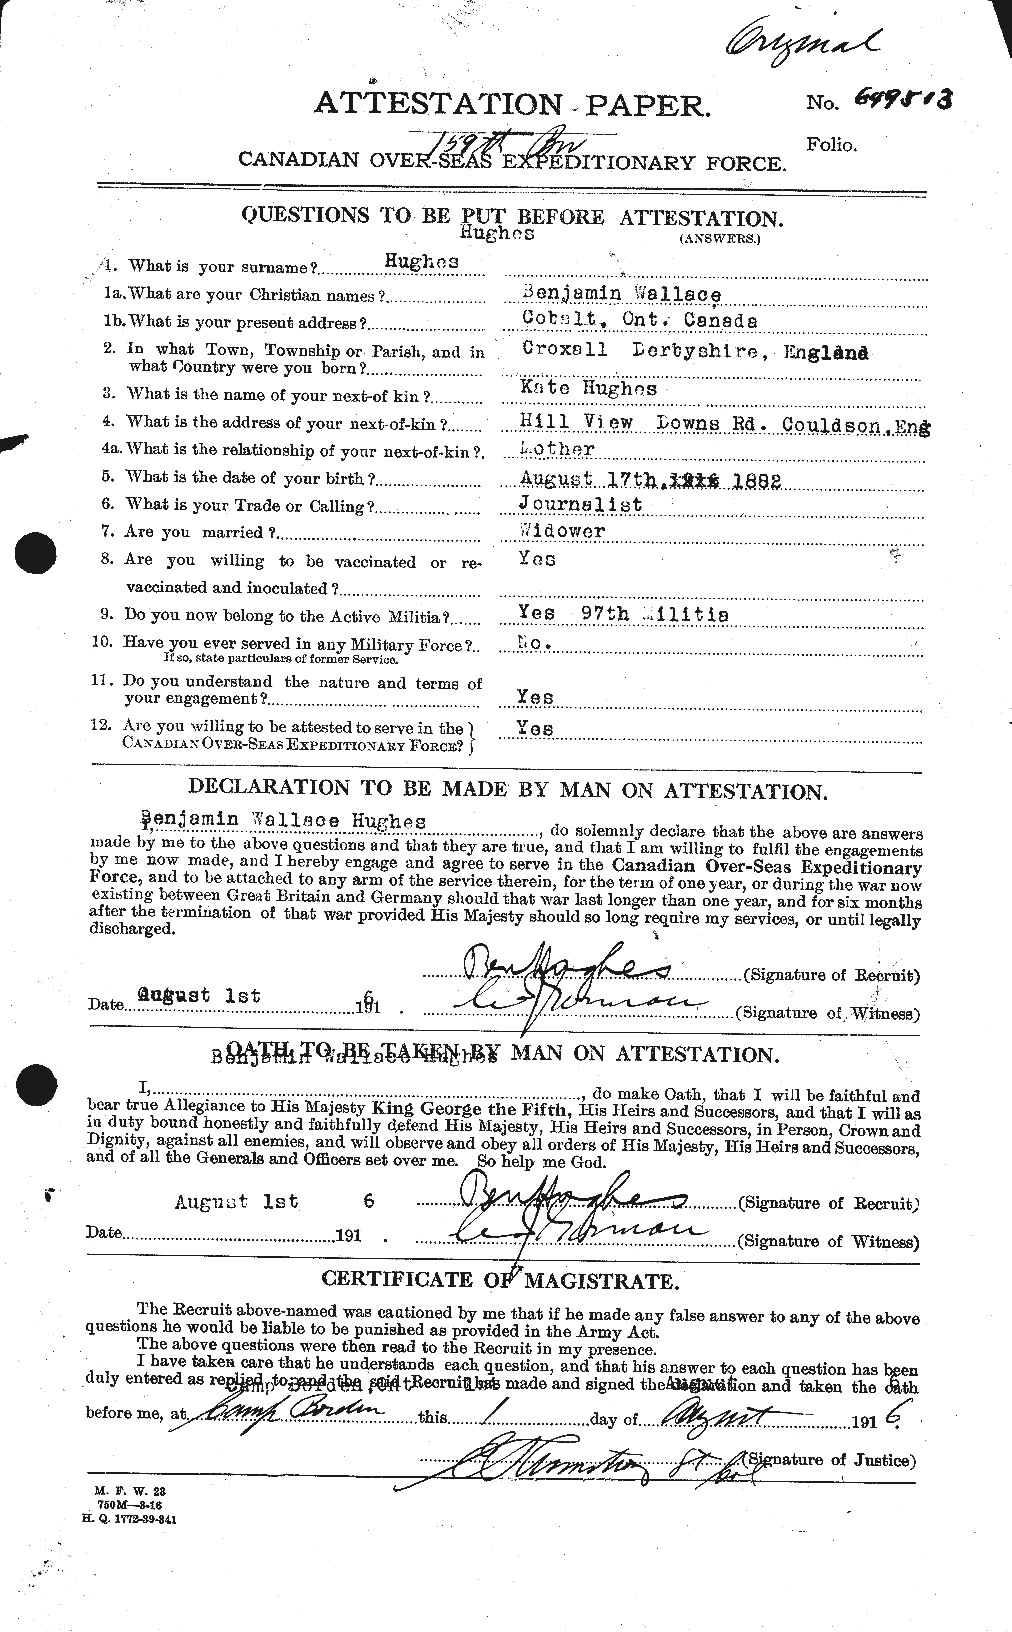 Personnel Records of the First World War - CEF 402578a